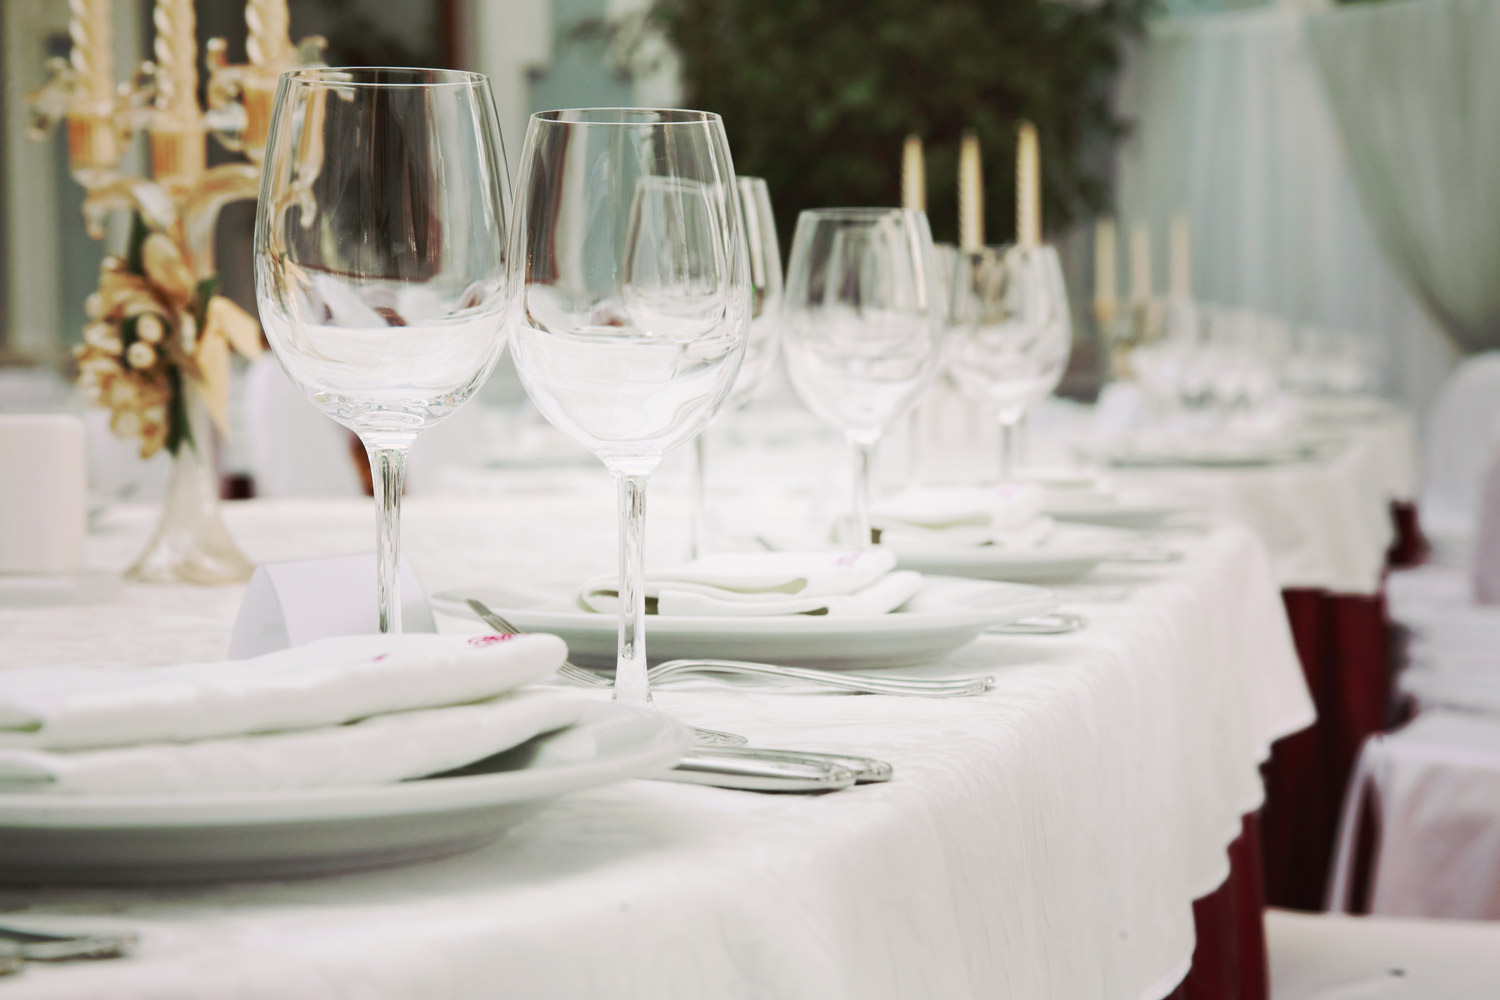 Banquets and events